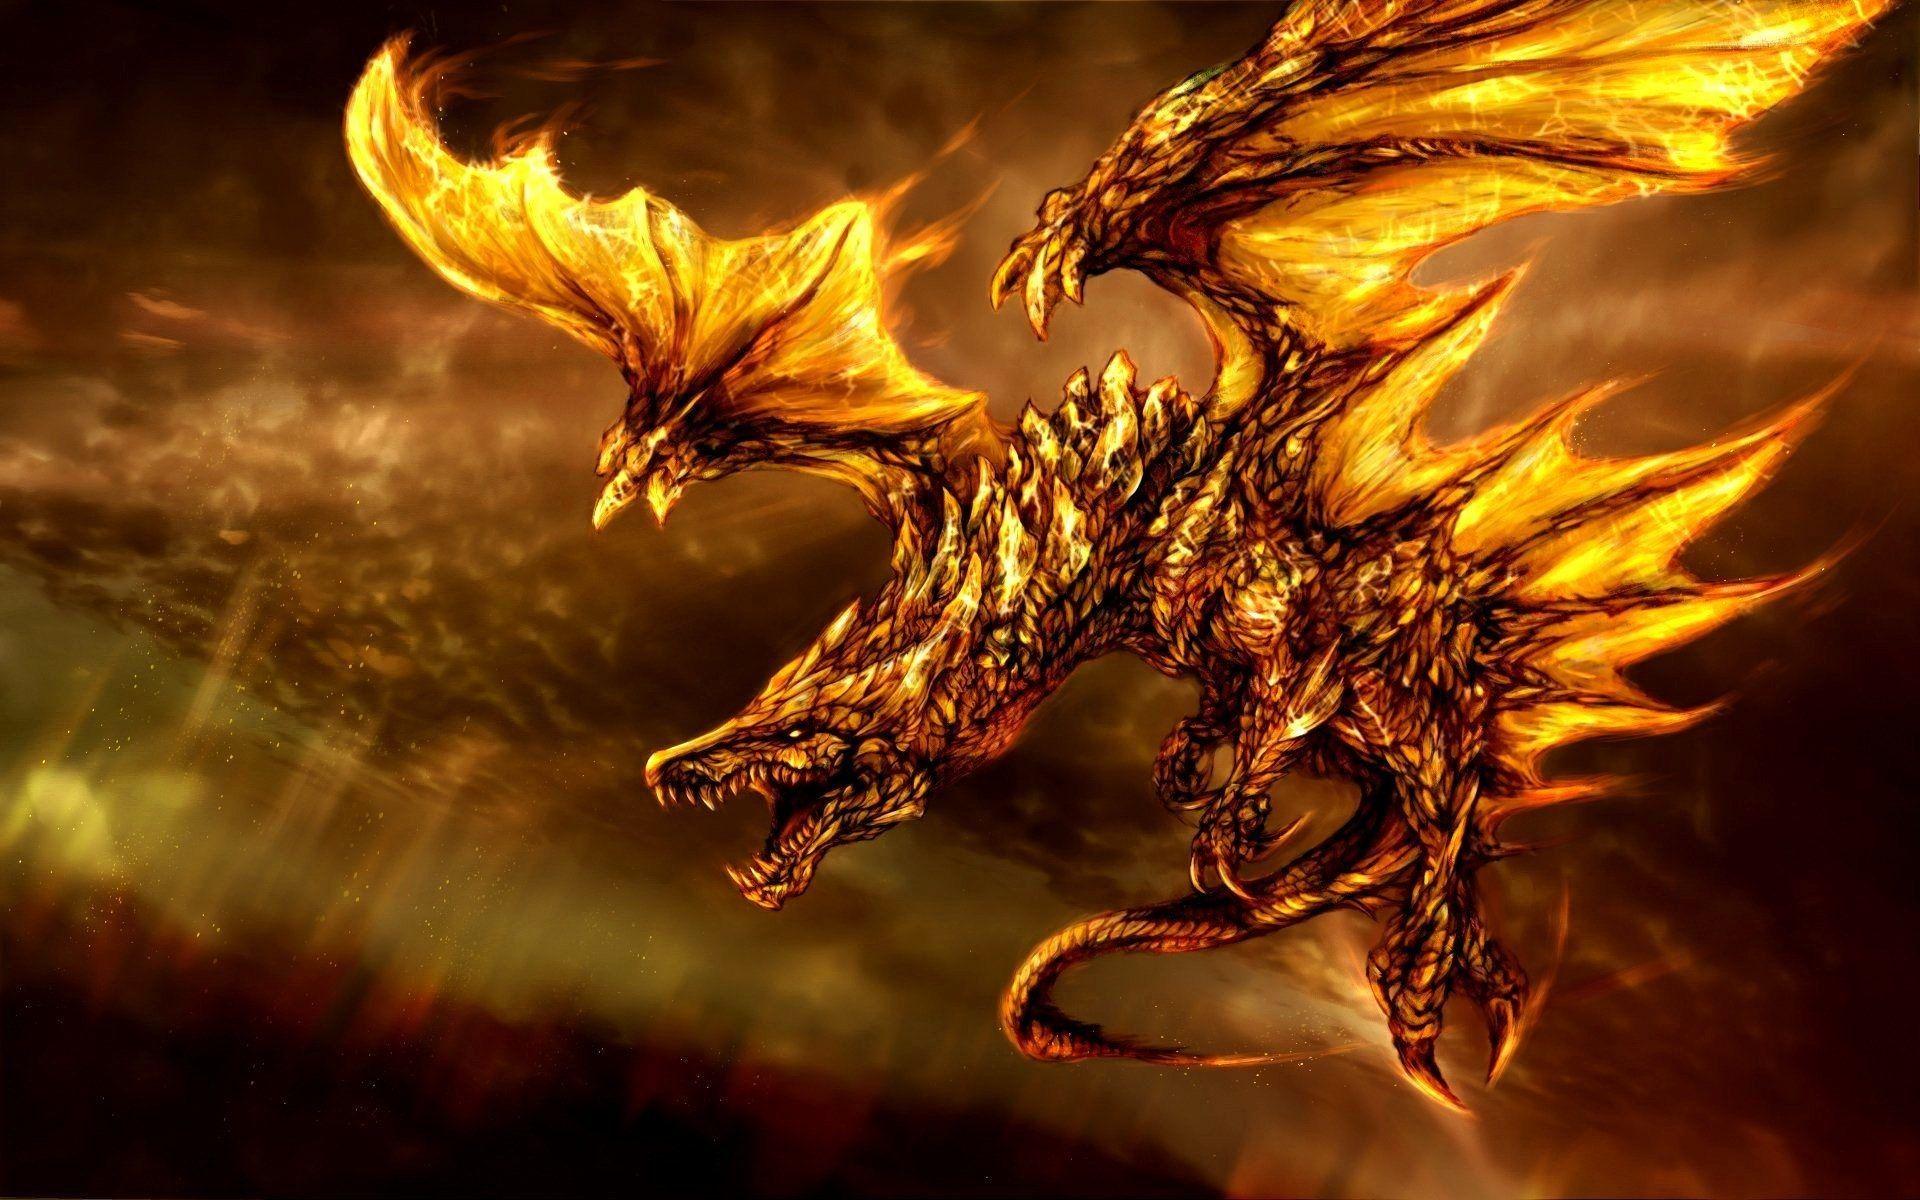 Fantasy Dragons Wallpapers 4K:Amazon.com:Appstore for Android